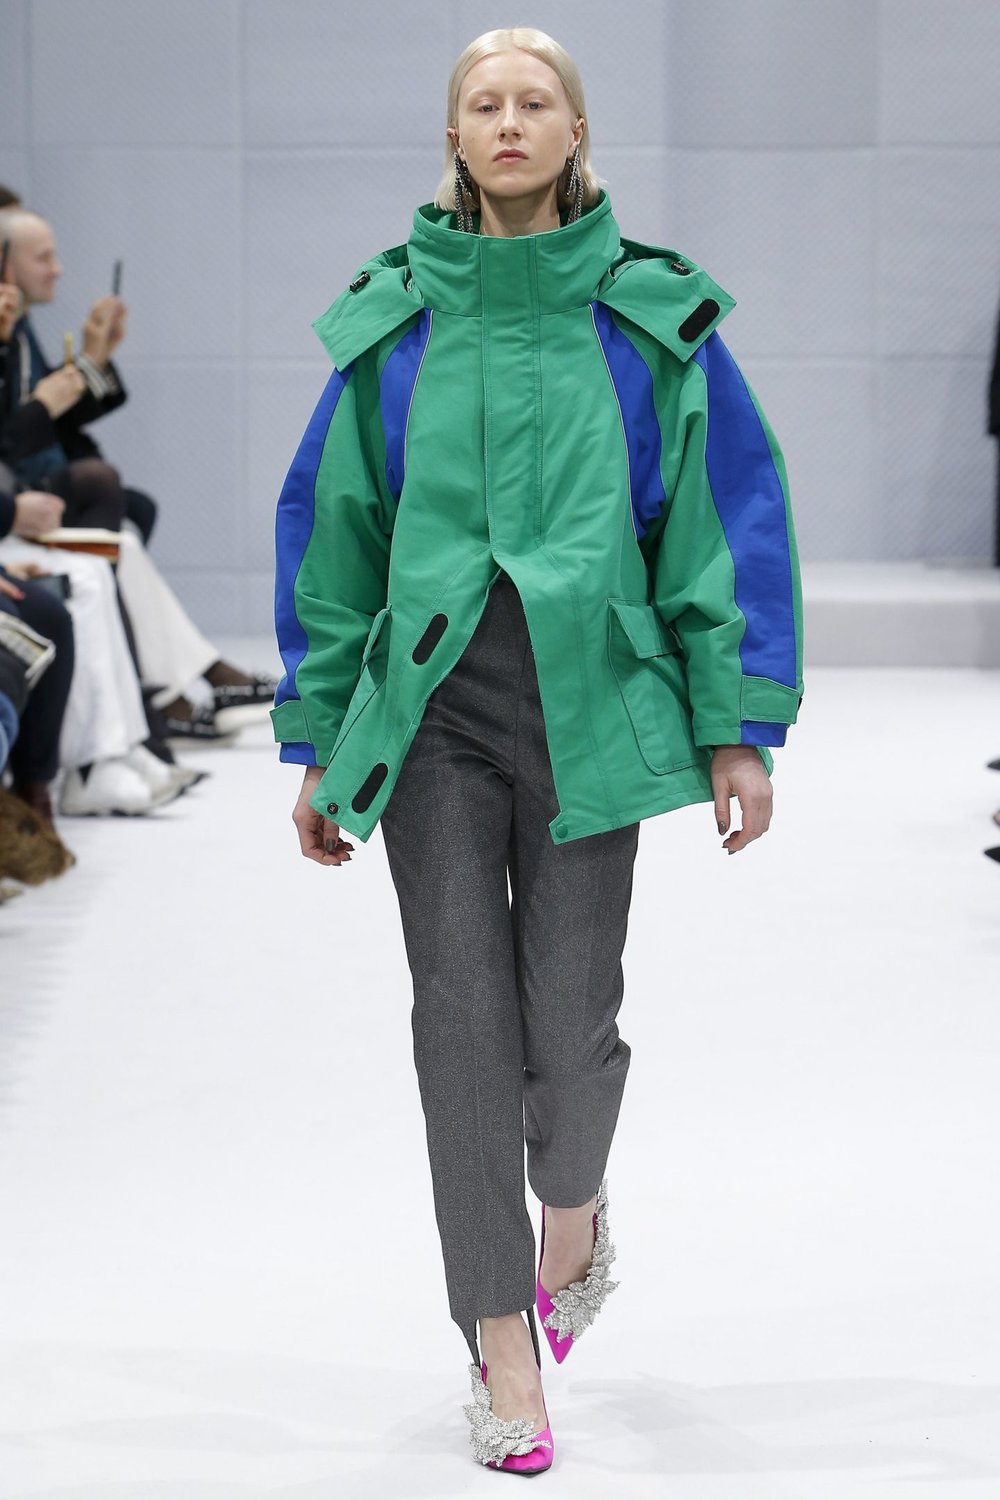 The workaday cagoule came to Paris Fashion Week thanks to Balenciaga, who showed theirs in a souped up 